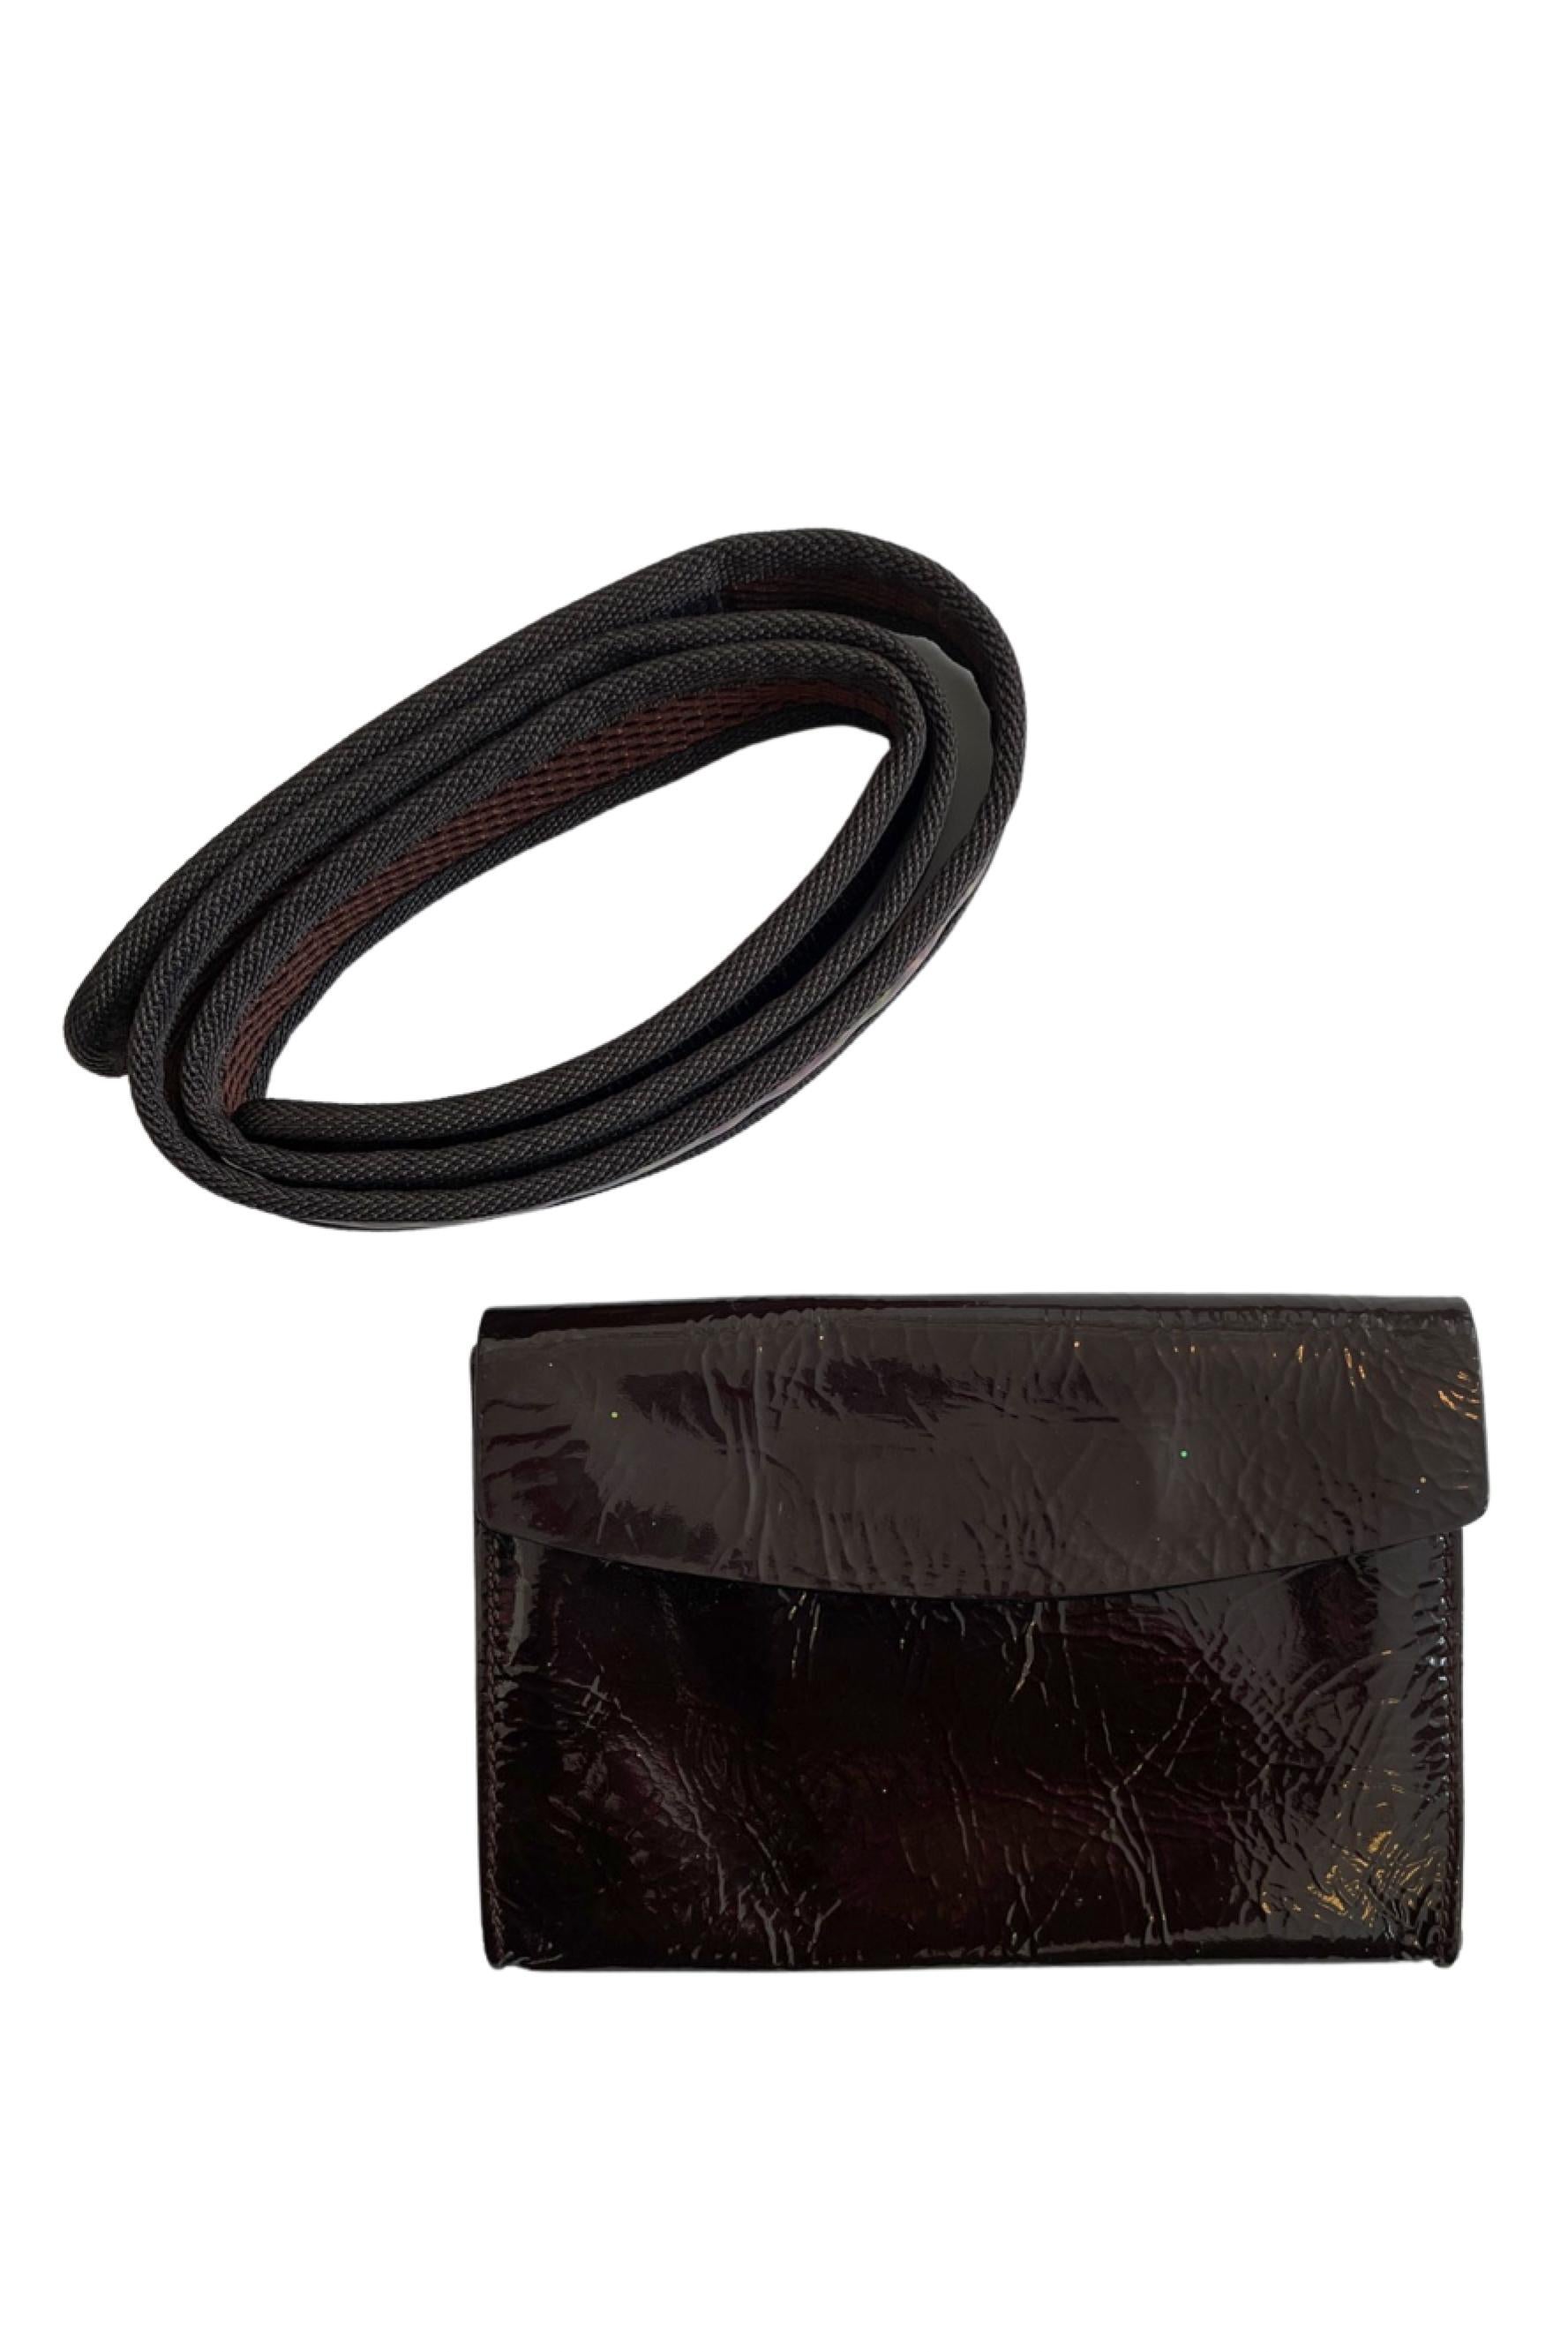 Miu Miu Brown Patent Leather Psychedelic Waist Bag Belt For Sale 3